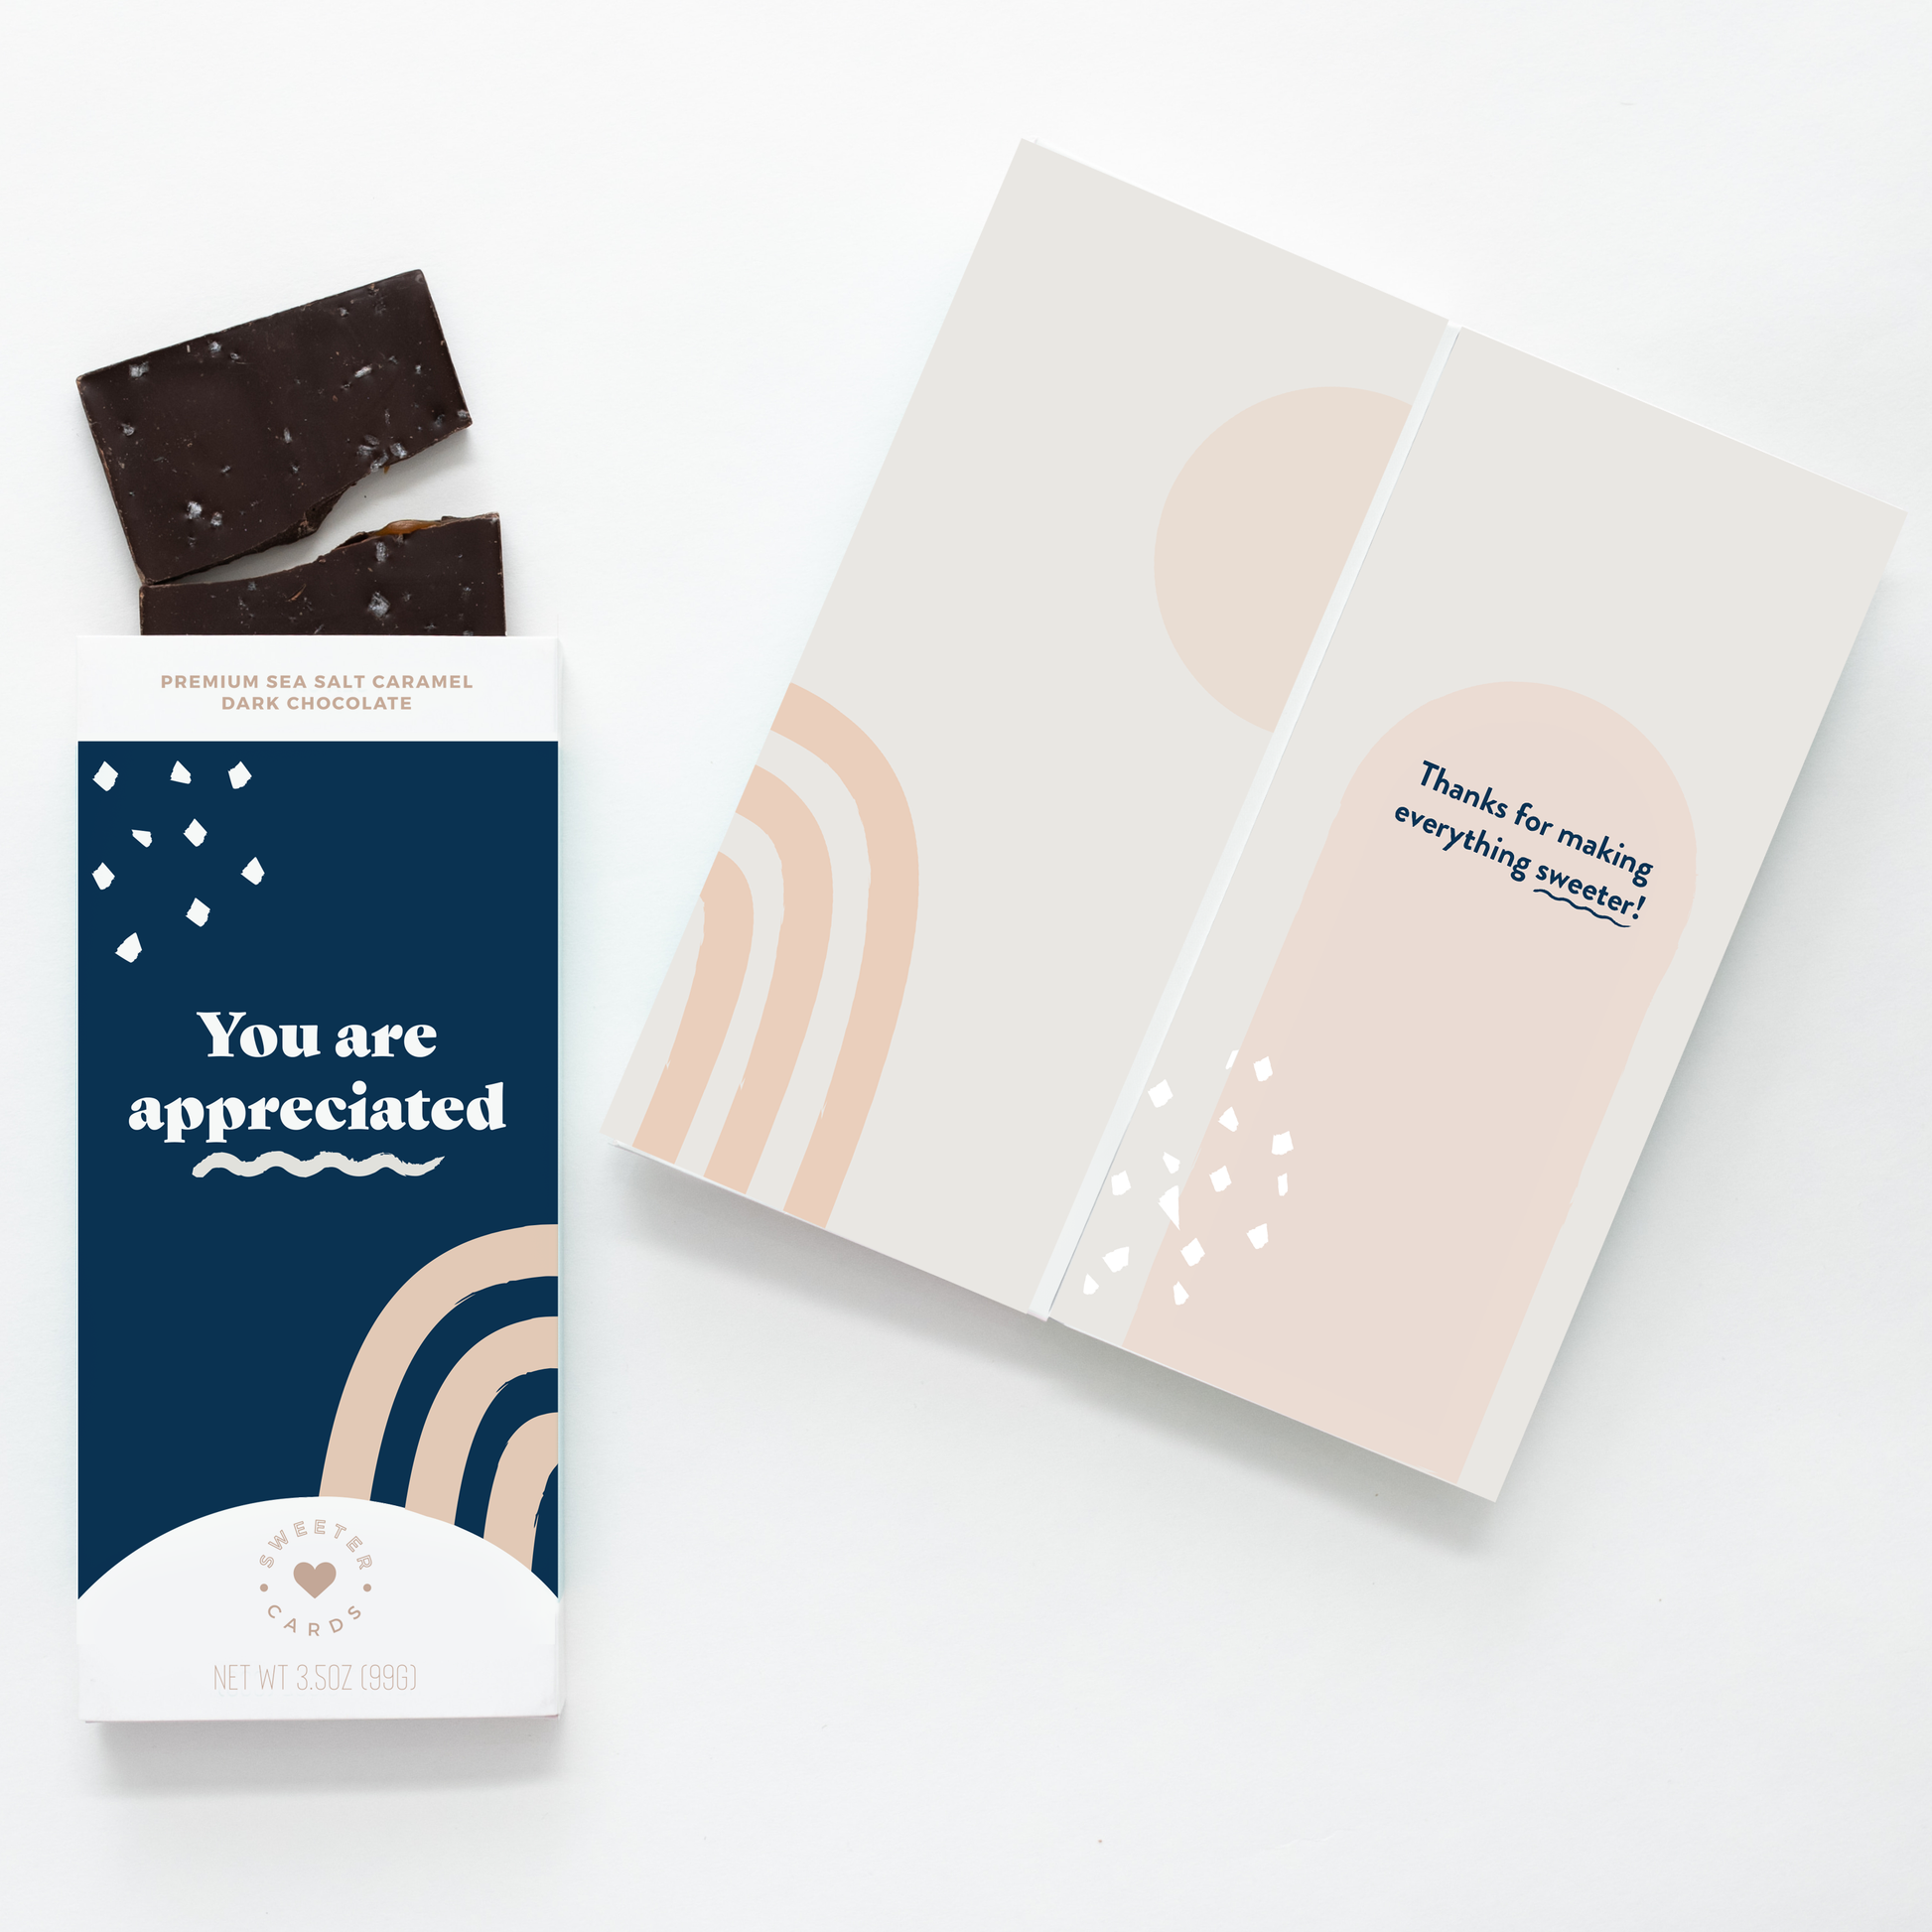 Sweeter Card - Chocolate-Filled You are Appreciated Greeting Card – NEW!  Sweeter Cards Chocolate Bar + Greeting Card in ONE!   -better made easy-eco-friendly-sustainable-gifting